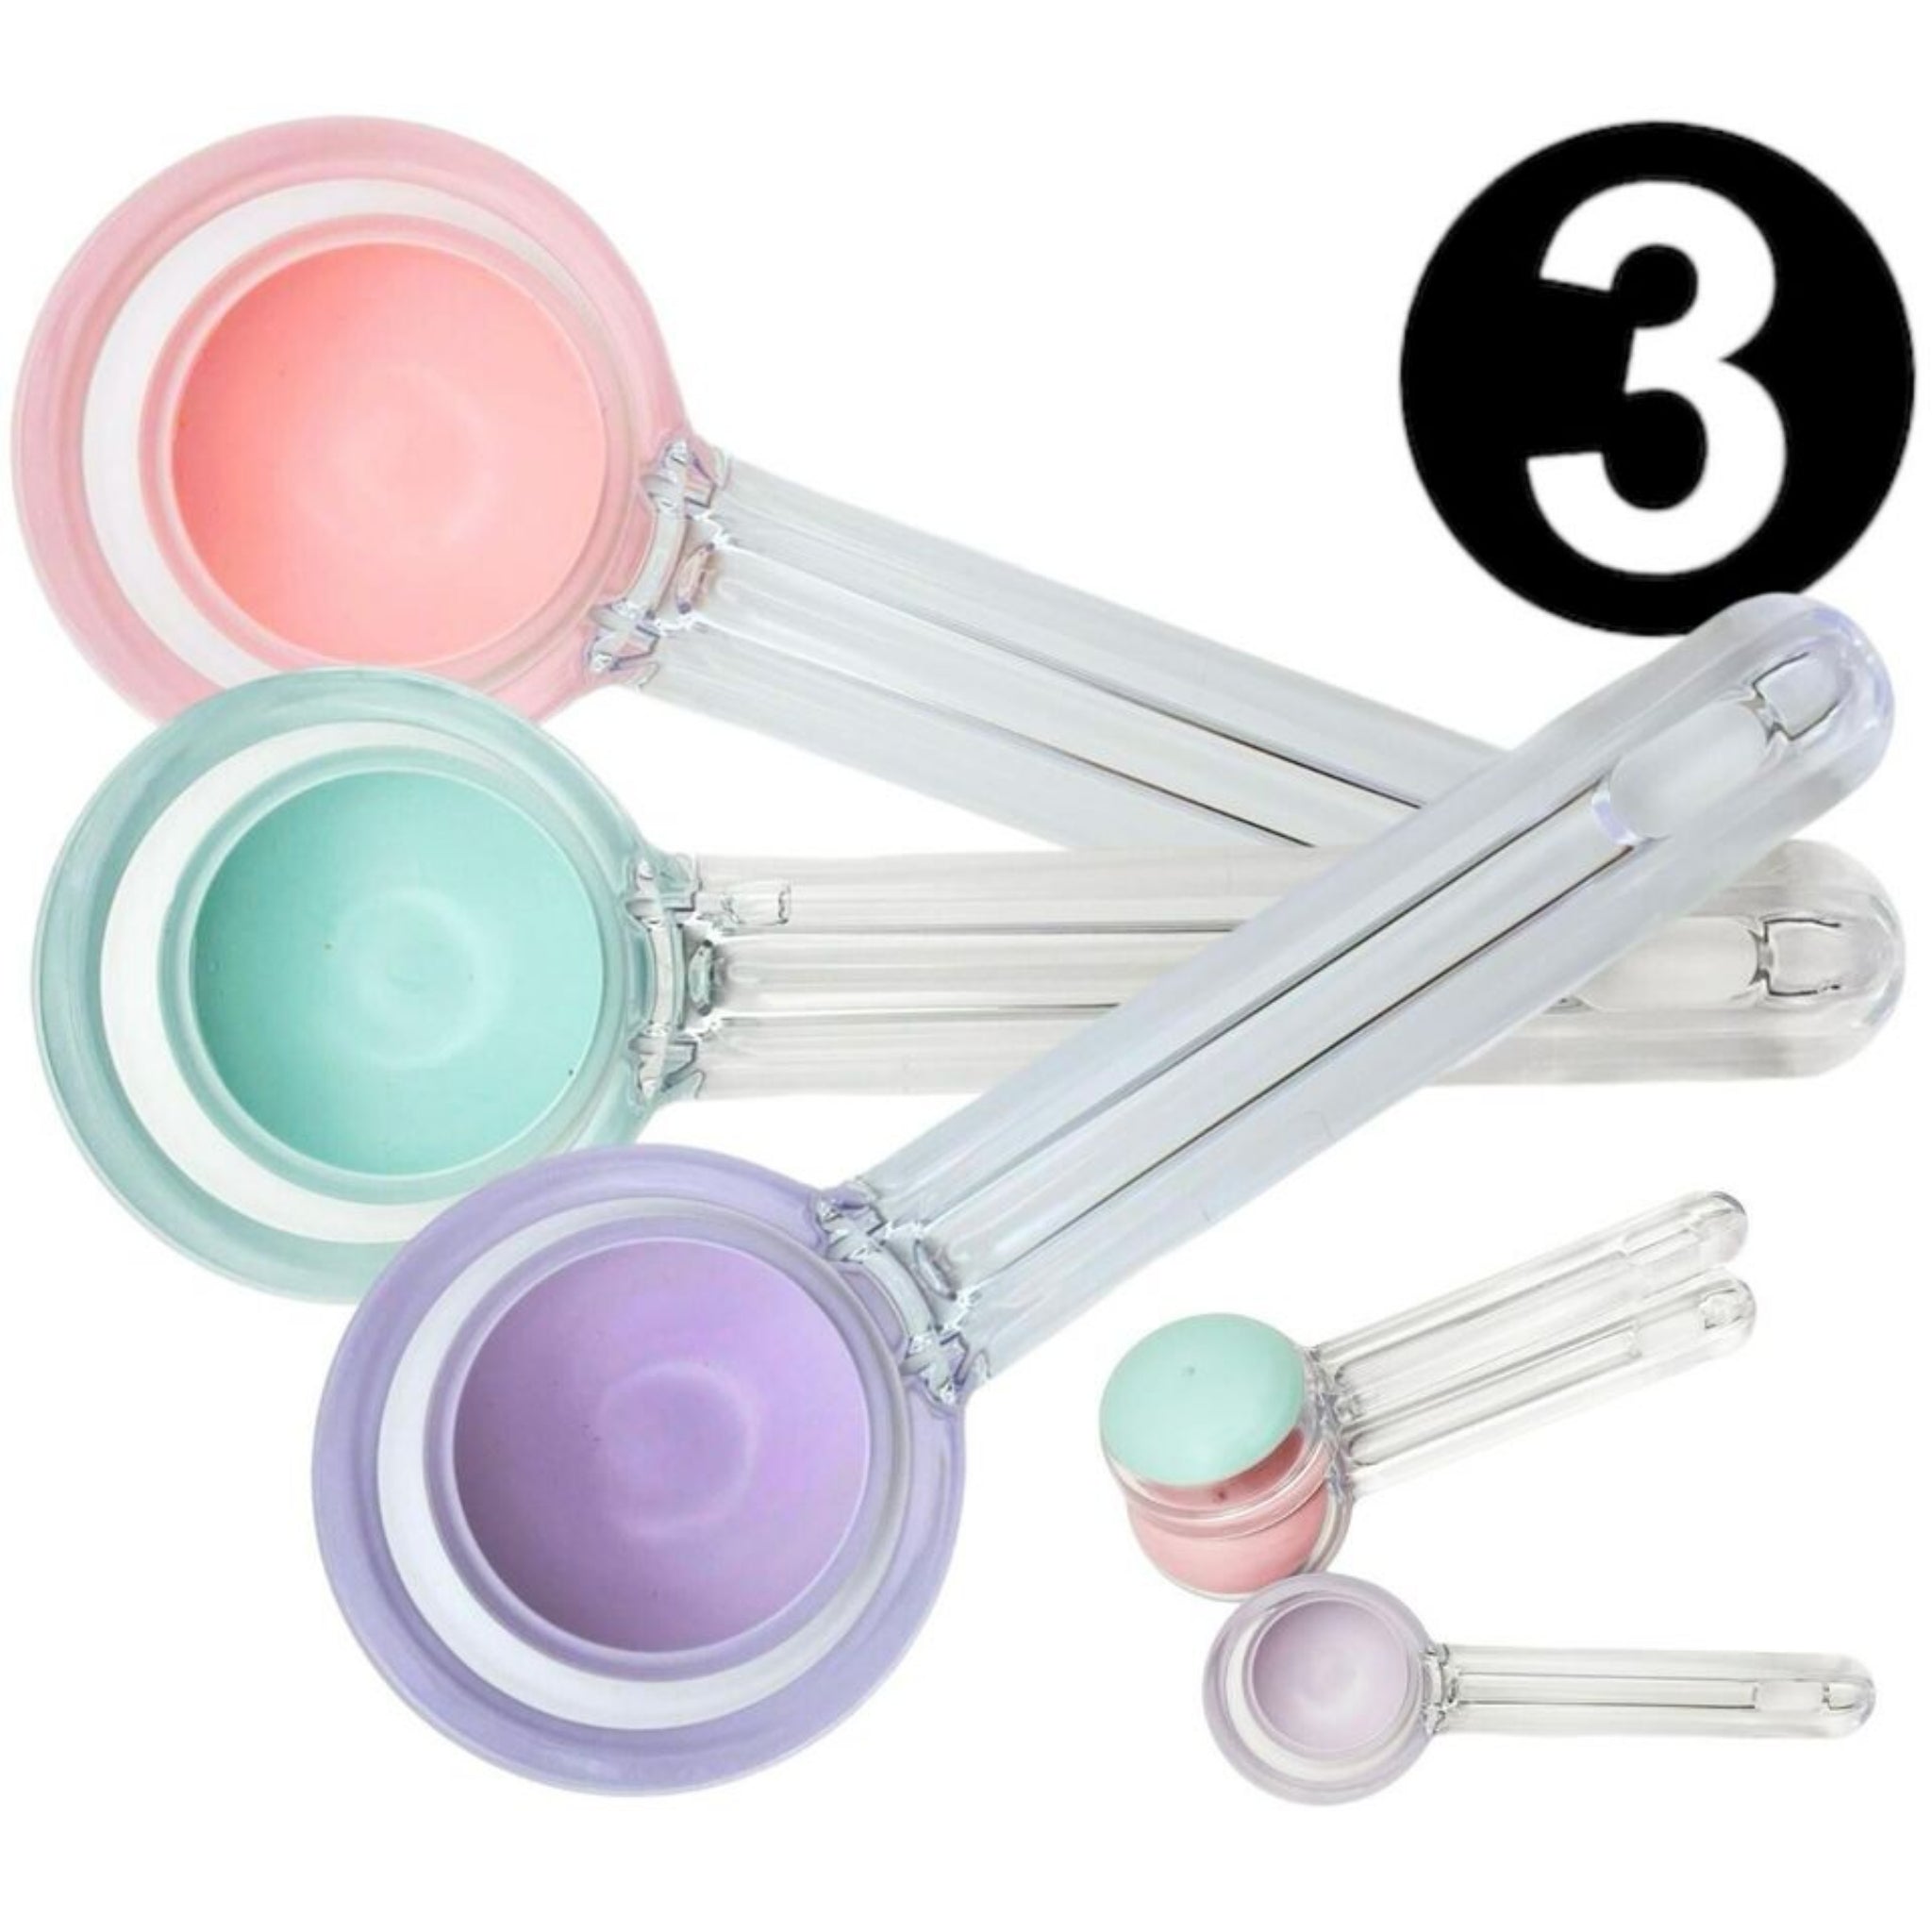 Beclen Harp 3 Pack Push & Serve ICE Cream Scoop Kitchen Craft Silicone Living Colour Scoop